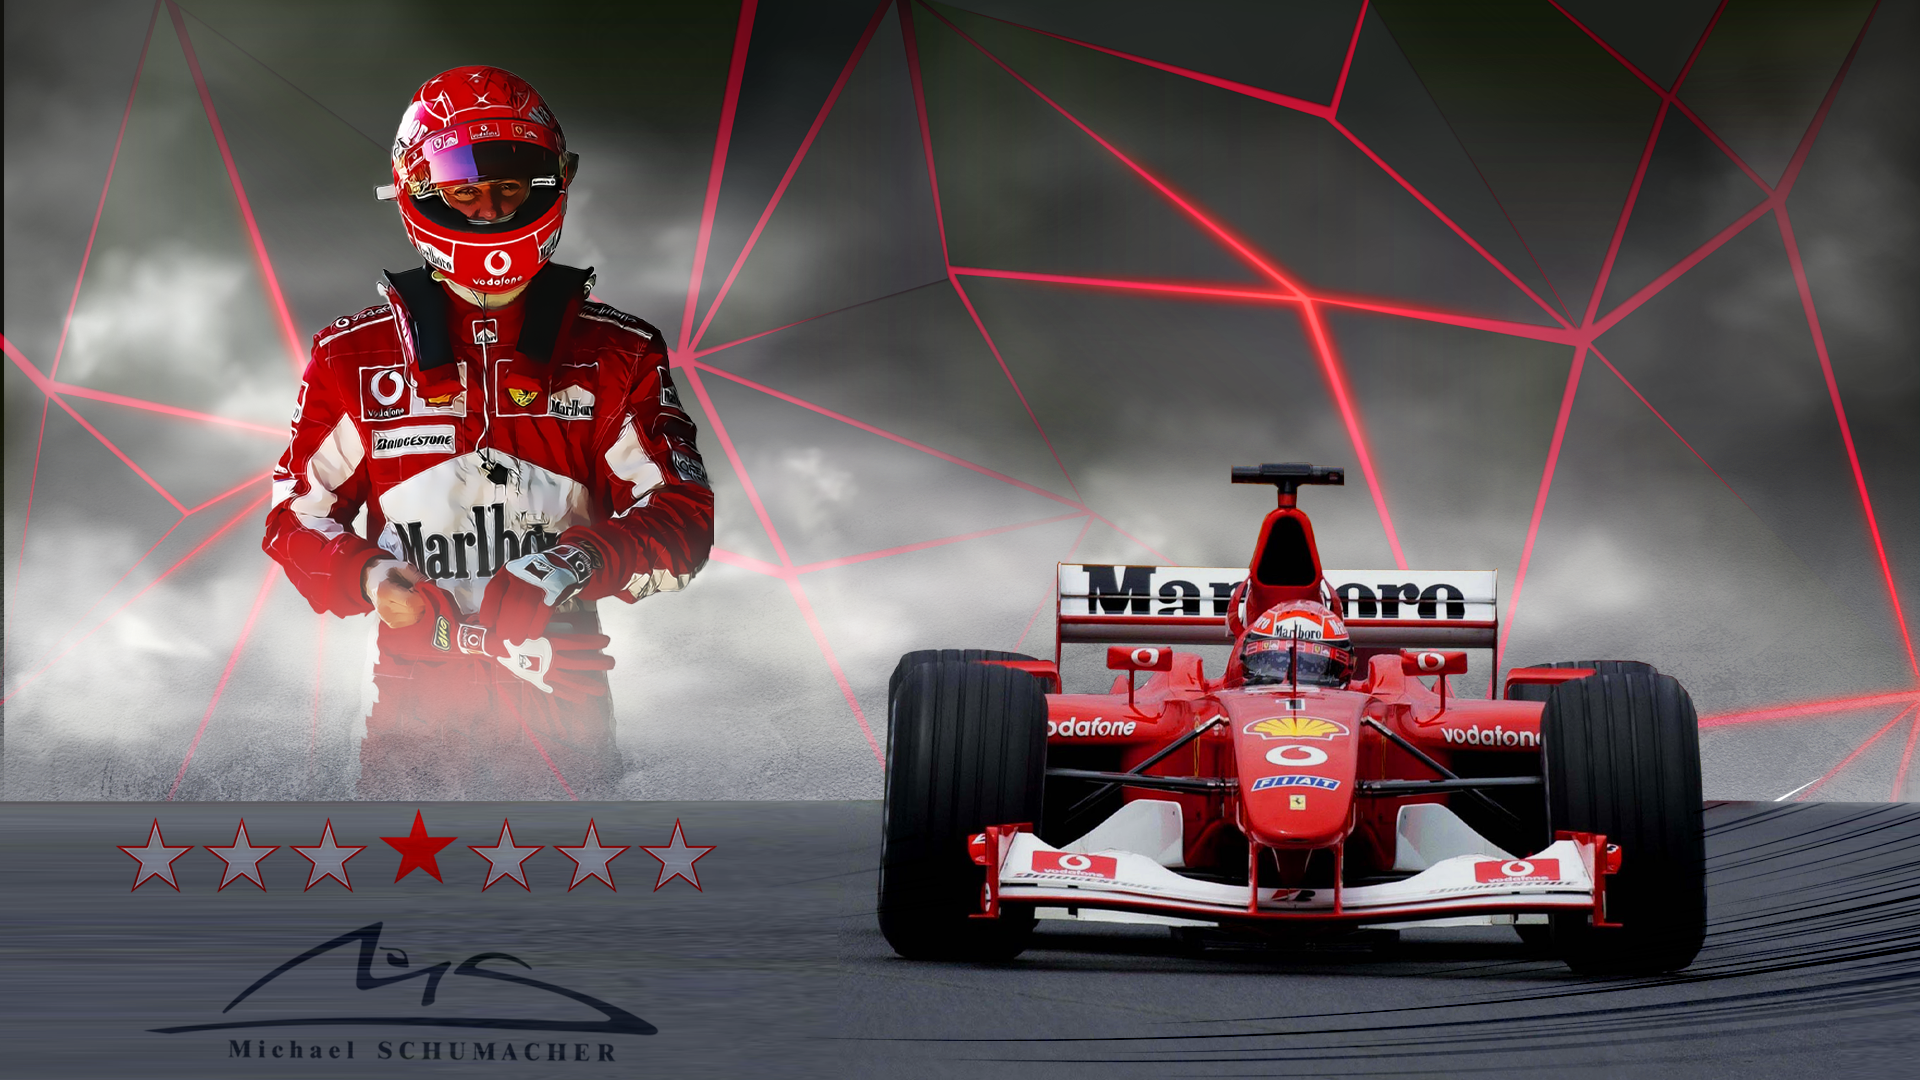 Michael Schumacher Is Sitting In A Car With Red Helmet HD Schumacher  Wallpapers  HD Wallpapers  ID 48742